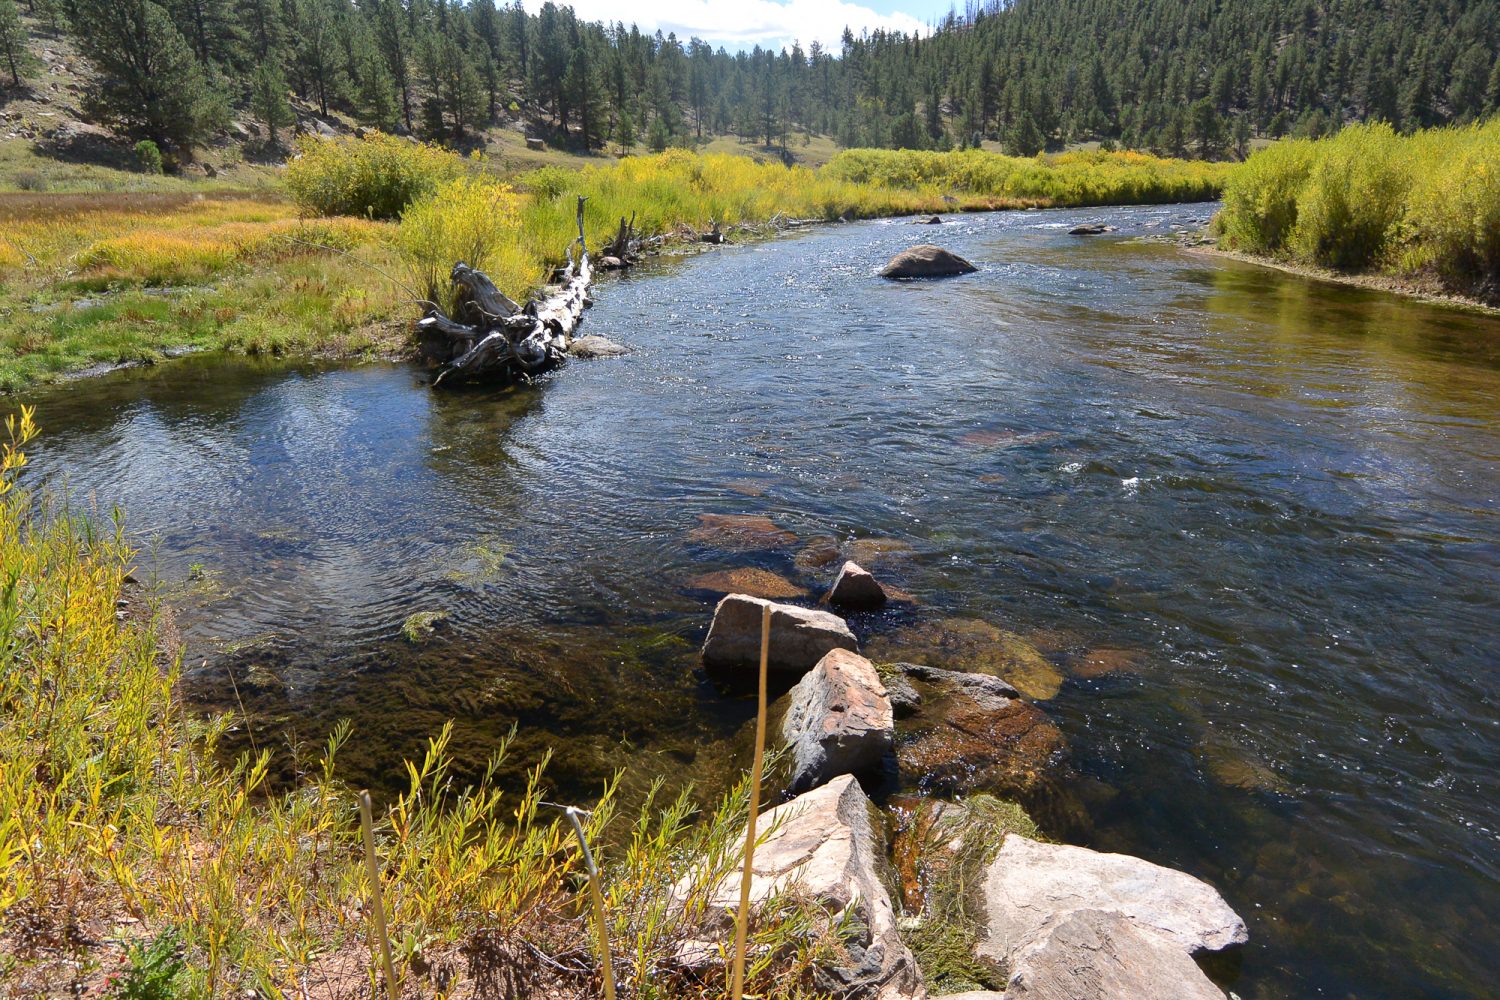 J-Hook structure in the Upper South Platte River